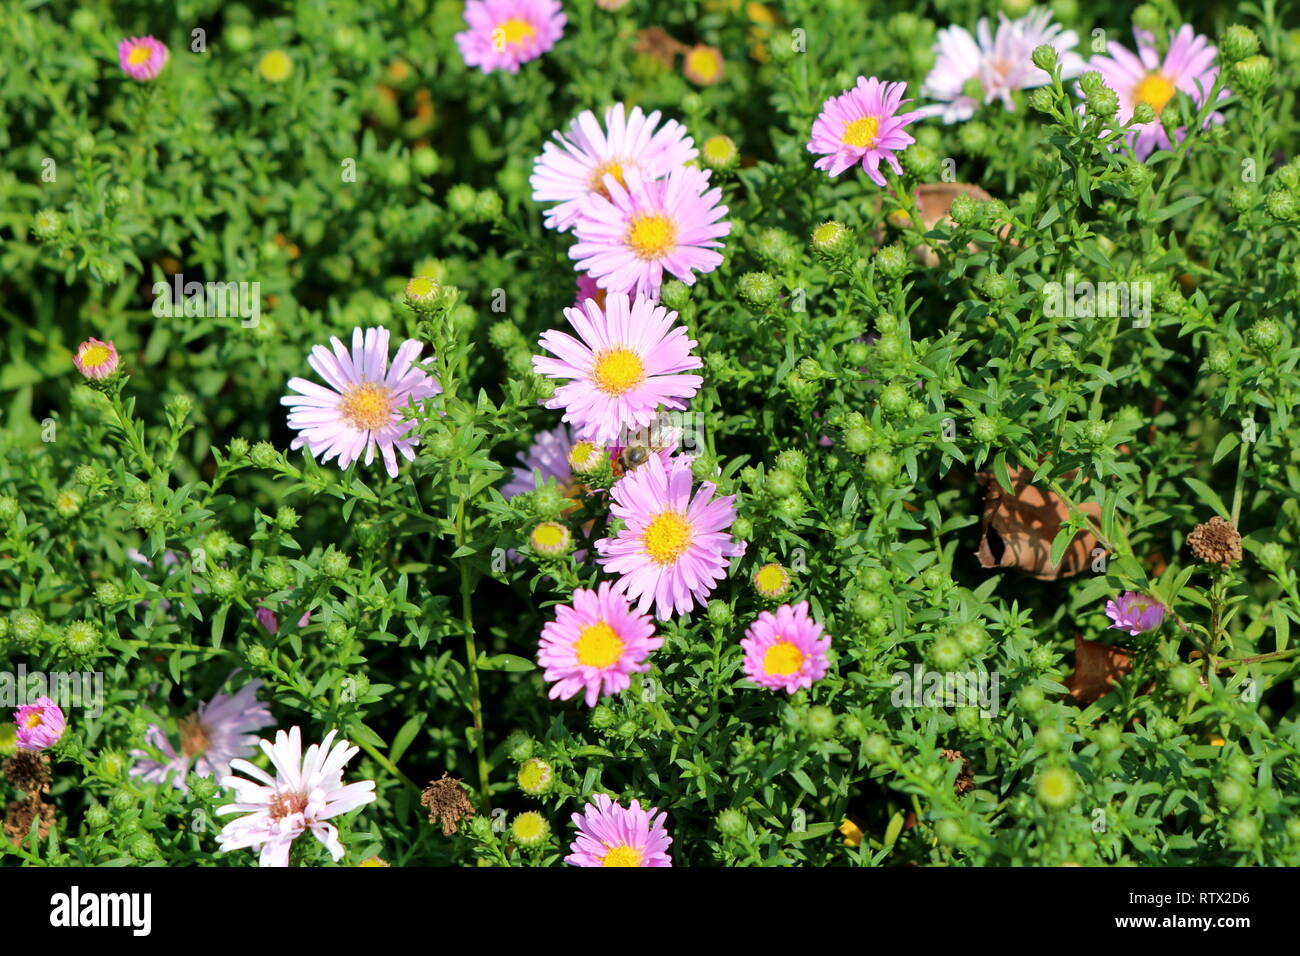 China aster or Callistephus chinensis or Annual aster monotypic genus of flowering plant planted like small bush in local garden Stock Photo